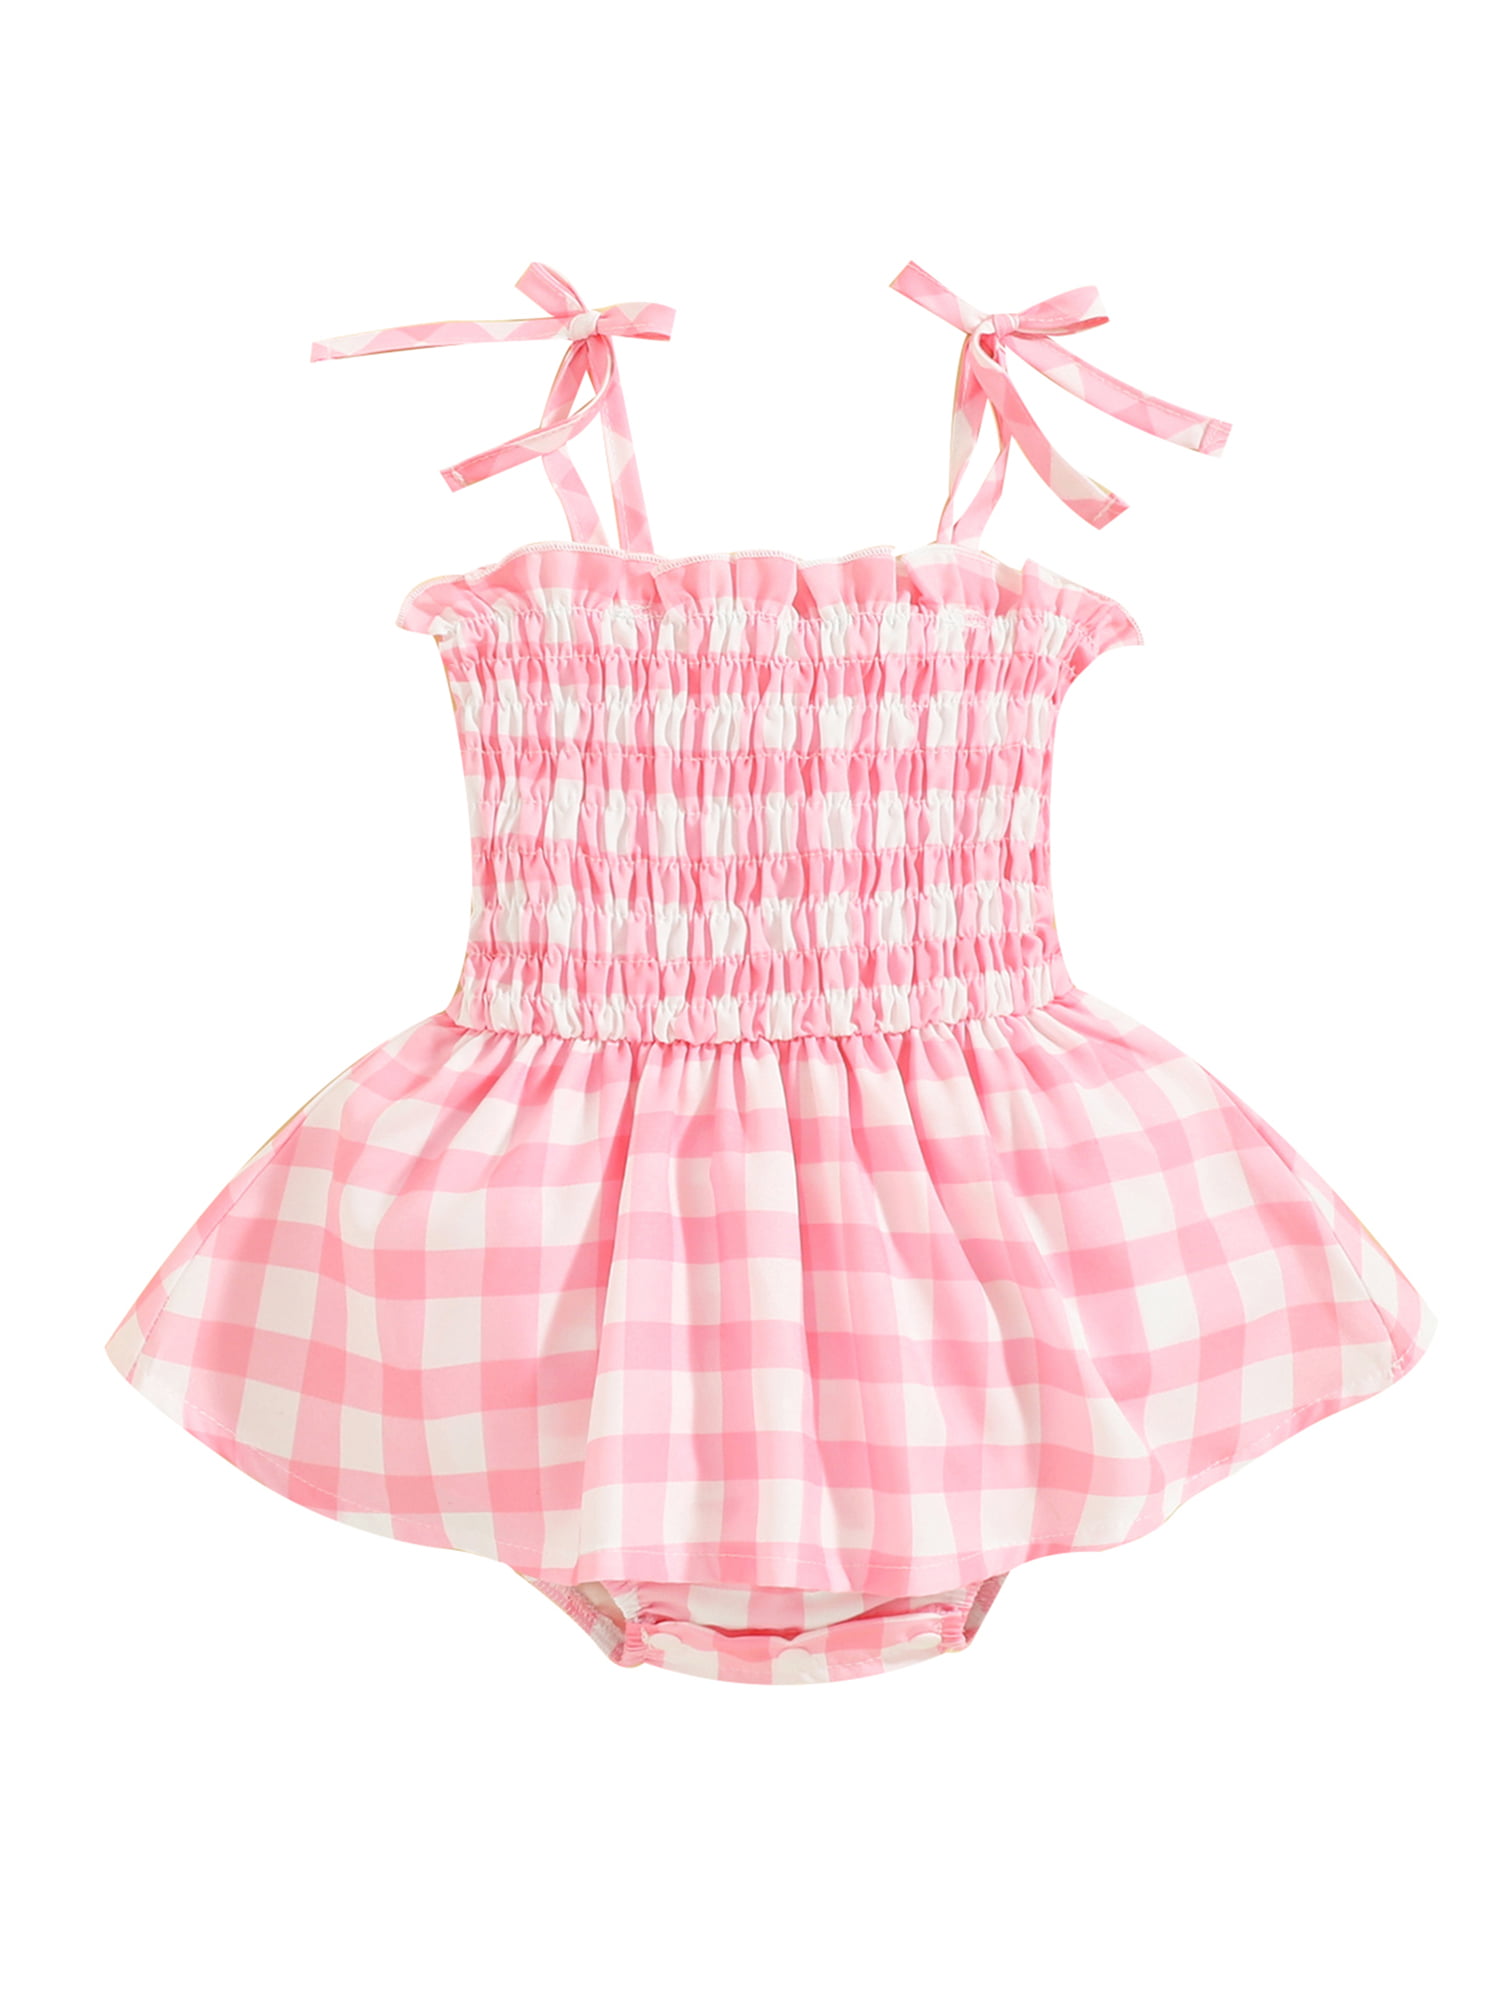 Kids Little Baby Girls Bowknot Sleeveless Strap Red Plaid Romper Jumpsuit Cropped Pants 